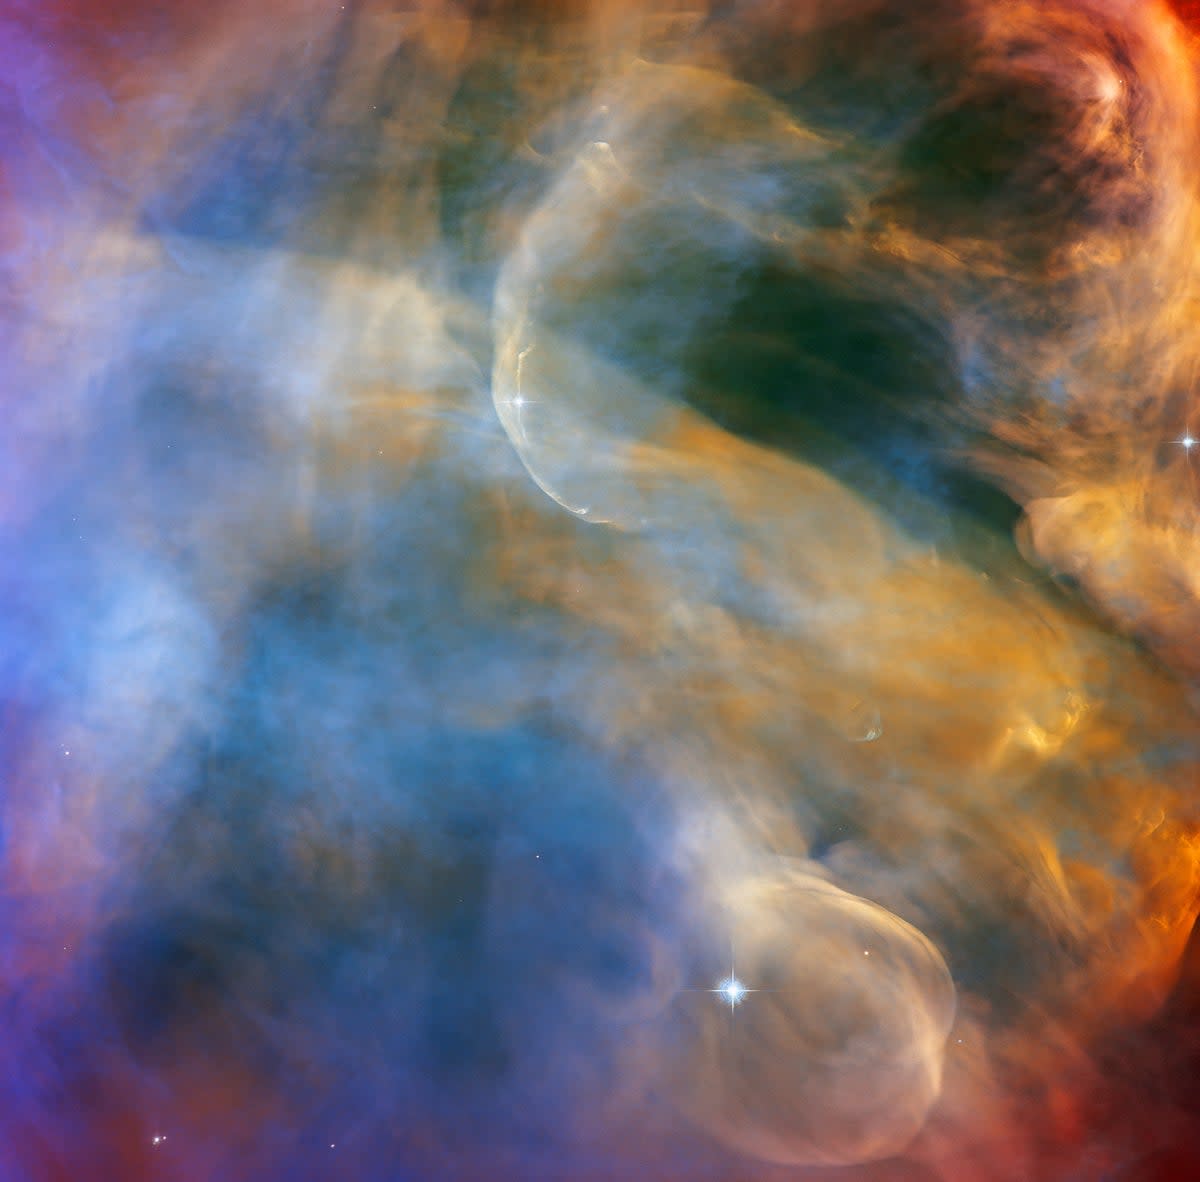 The Hubble Space Telescop reveals colorful outflows of stellar gas in the Orion Nebula (ESA/Hubble & NASA, J. Bally Ackn)